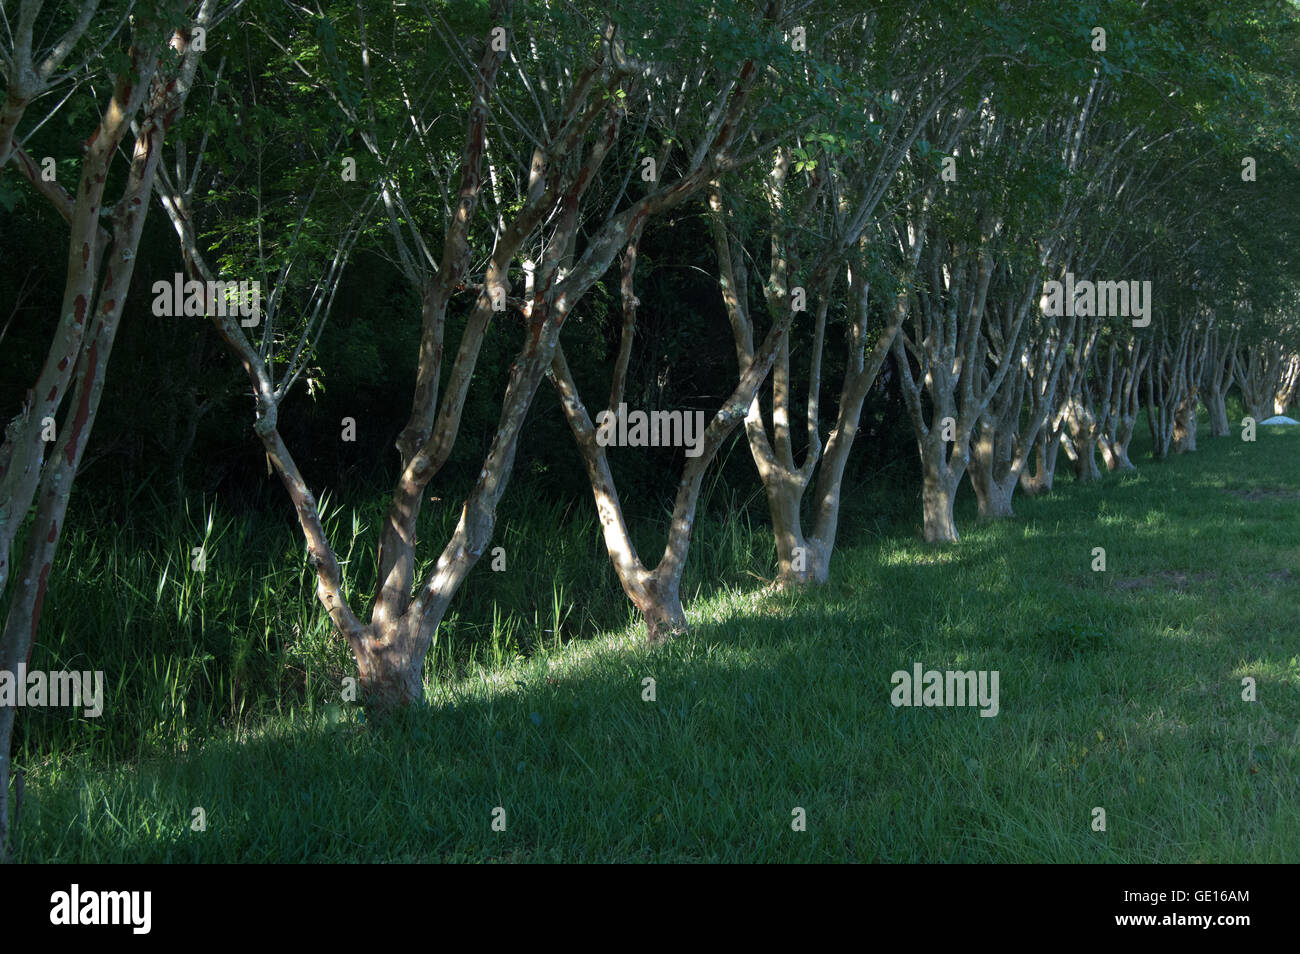 A row of crepe myrtle trees with grass on the ground. Stock Photo